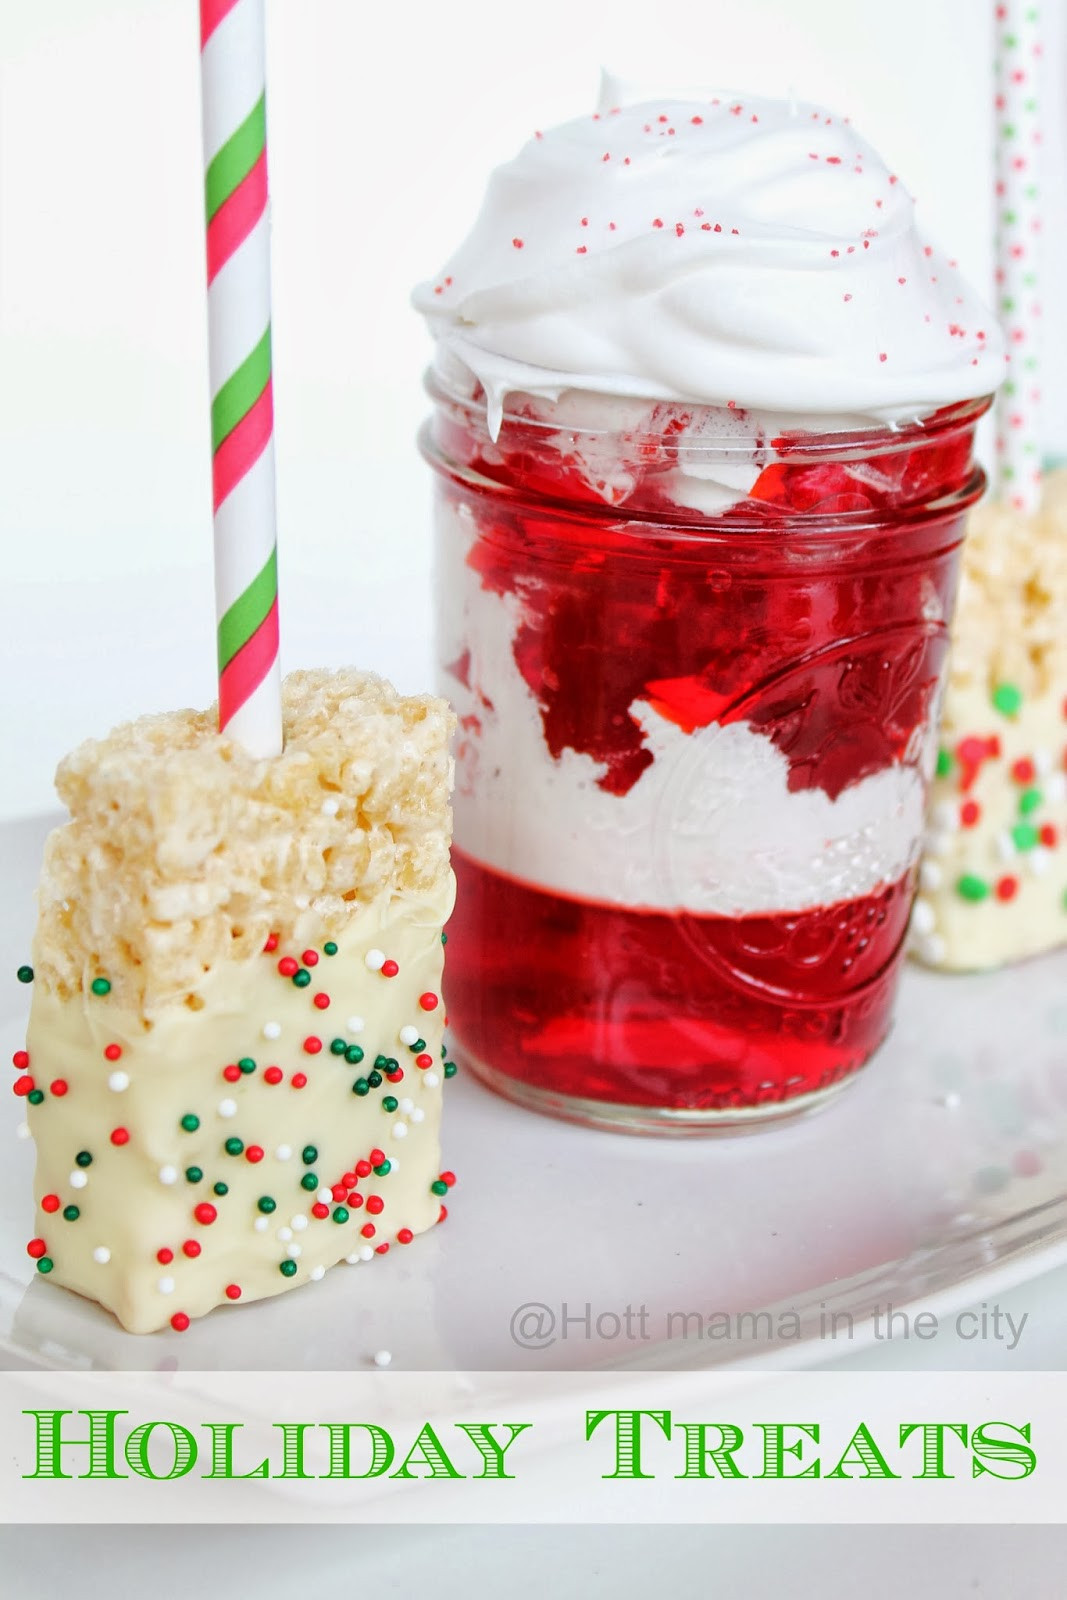 Holiday Desserts For Christmas
 Hot Mama In The City Fun and Festive Holiday Dessert Recipes